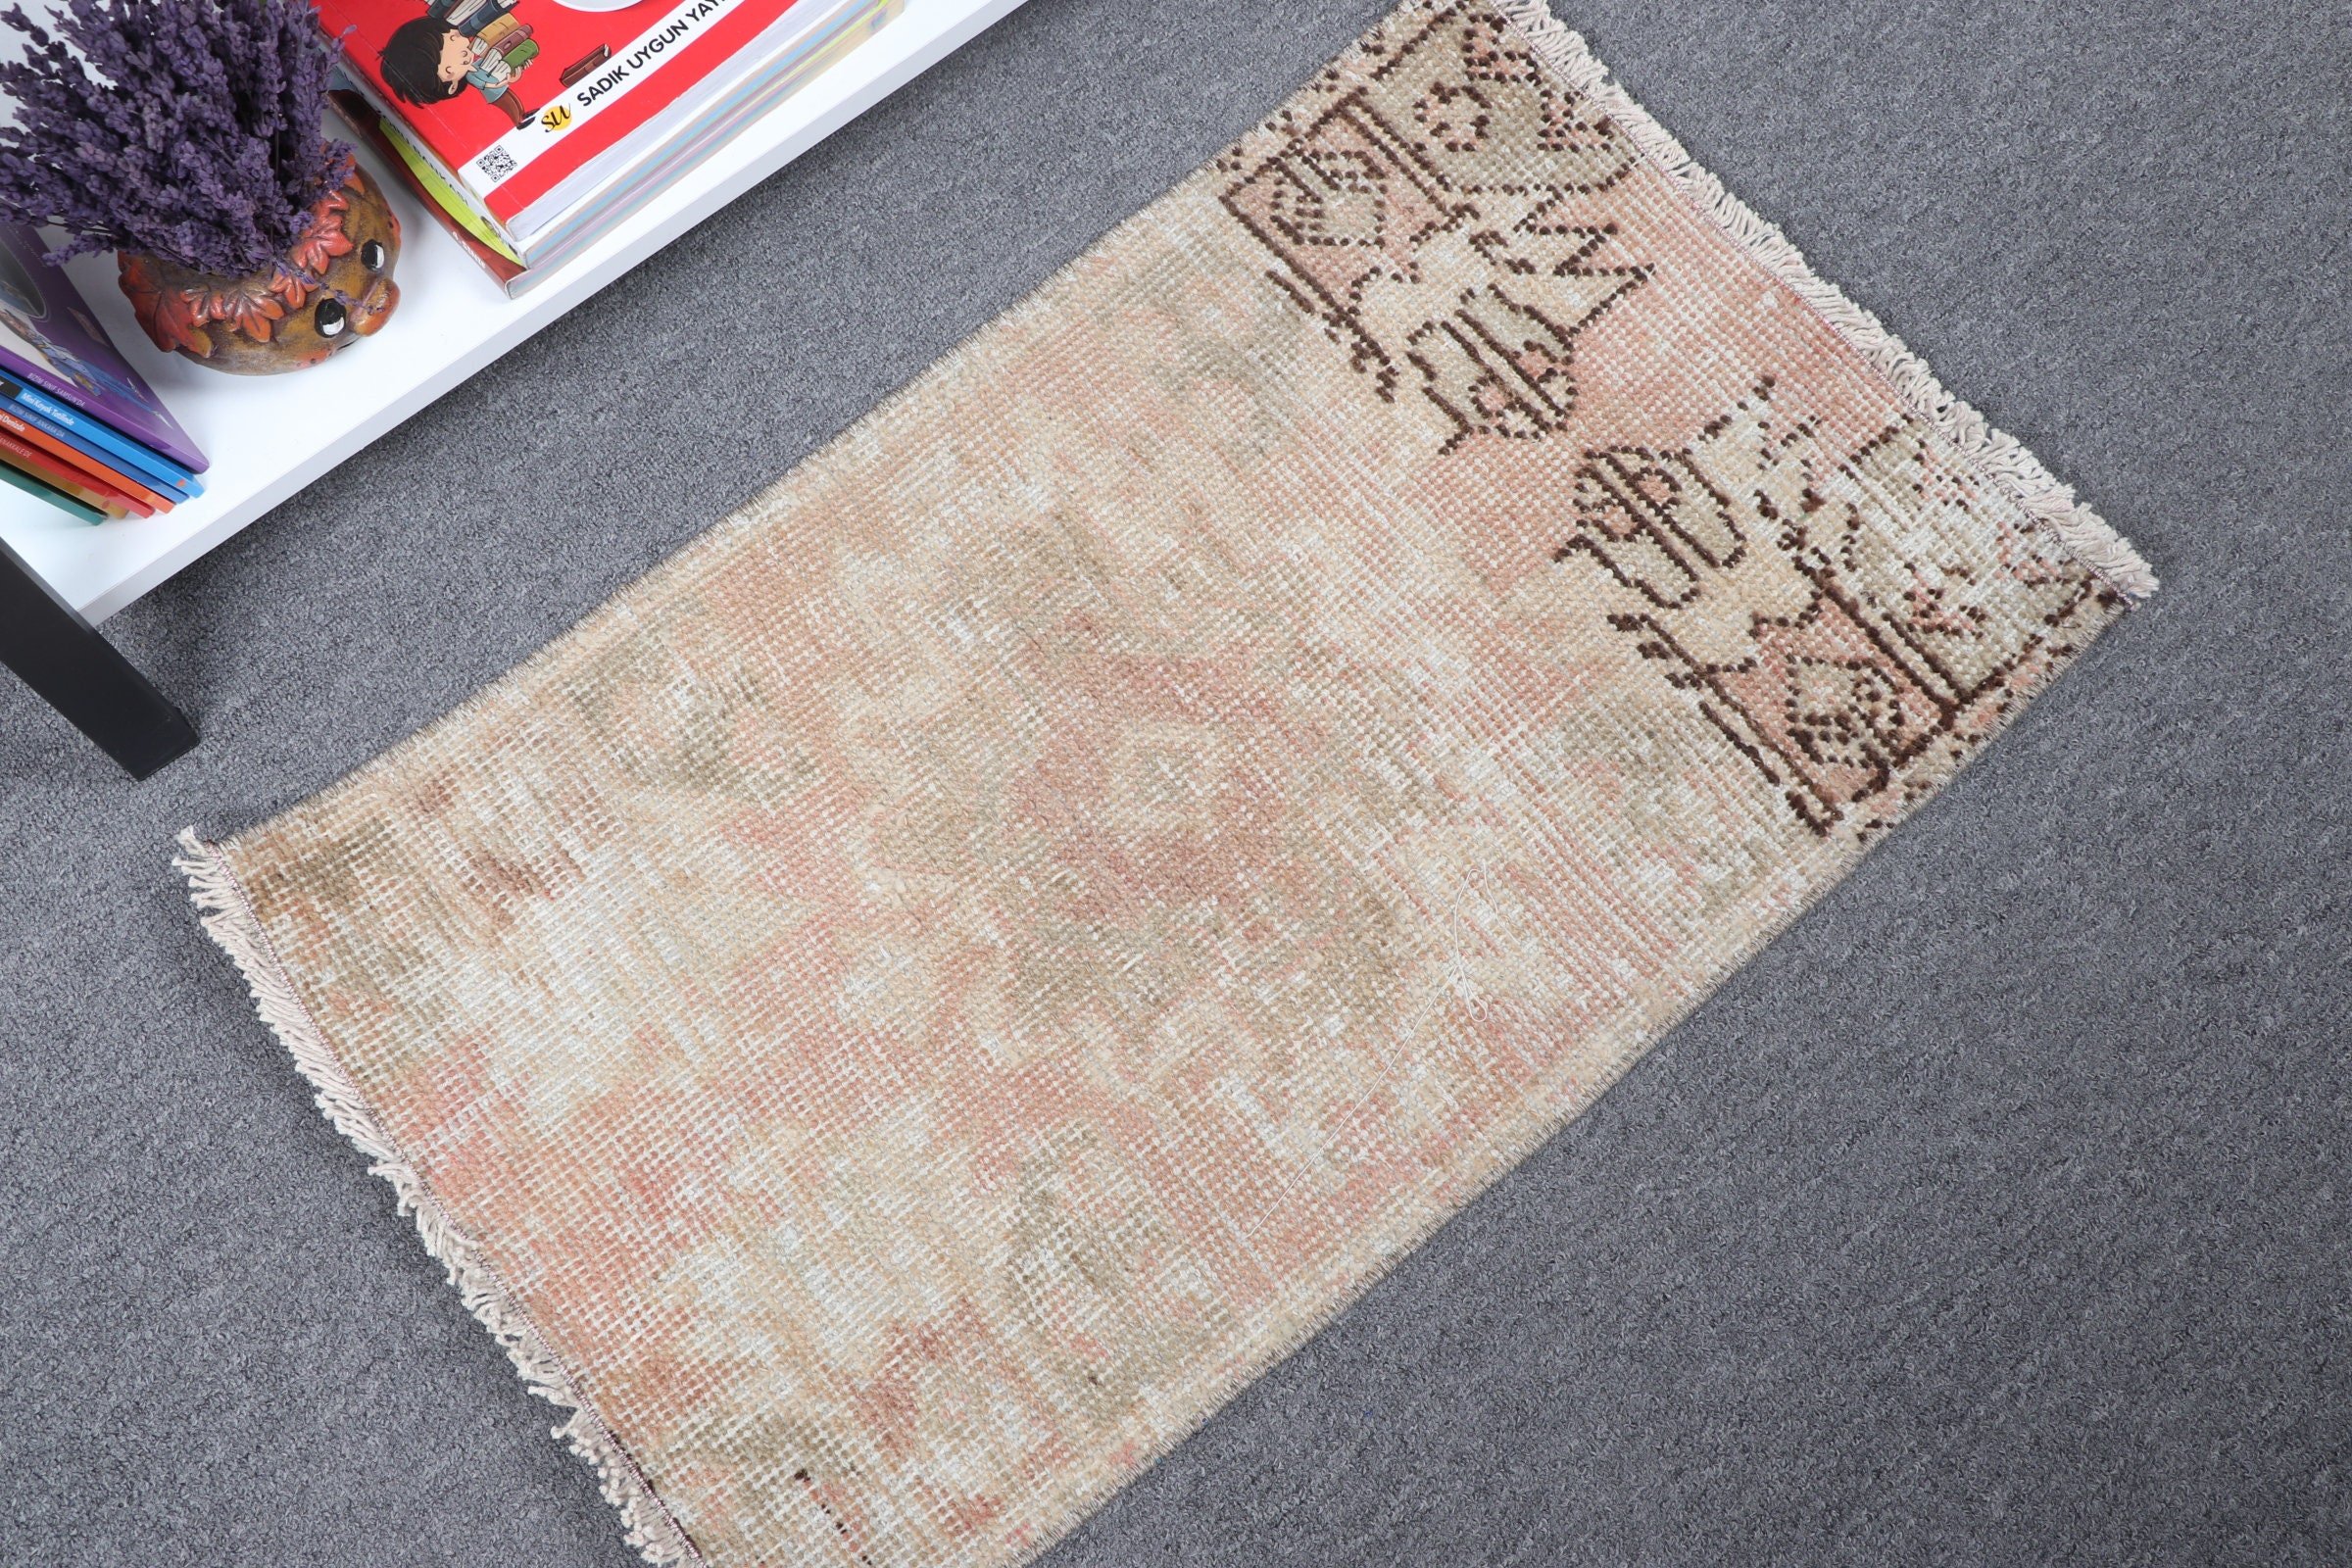 Antique Rugs, Rugs for Bath, Bath Rugs, Vintage Rug, Oushak Rug, Pink Home Decor Rugs, Turkish Rug, Car Mat Rugs, 1.4x2.4 ft Small Rug